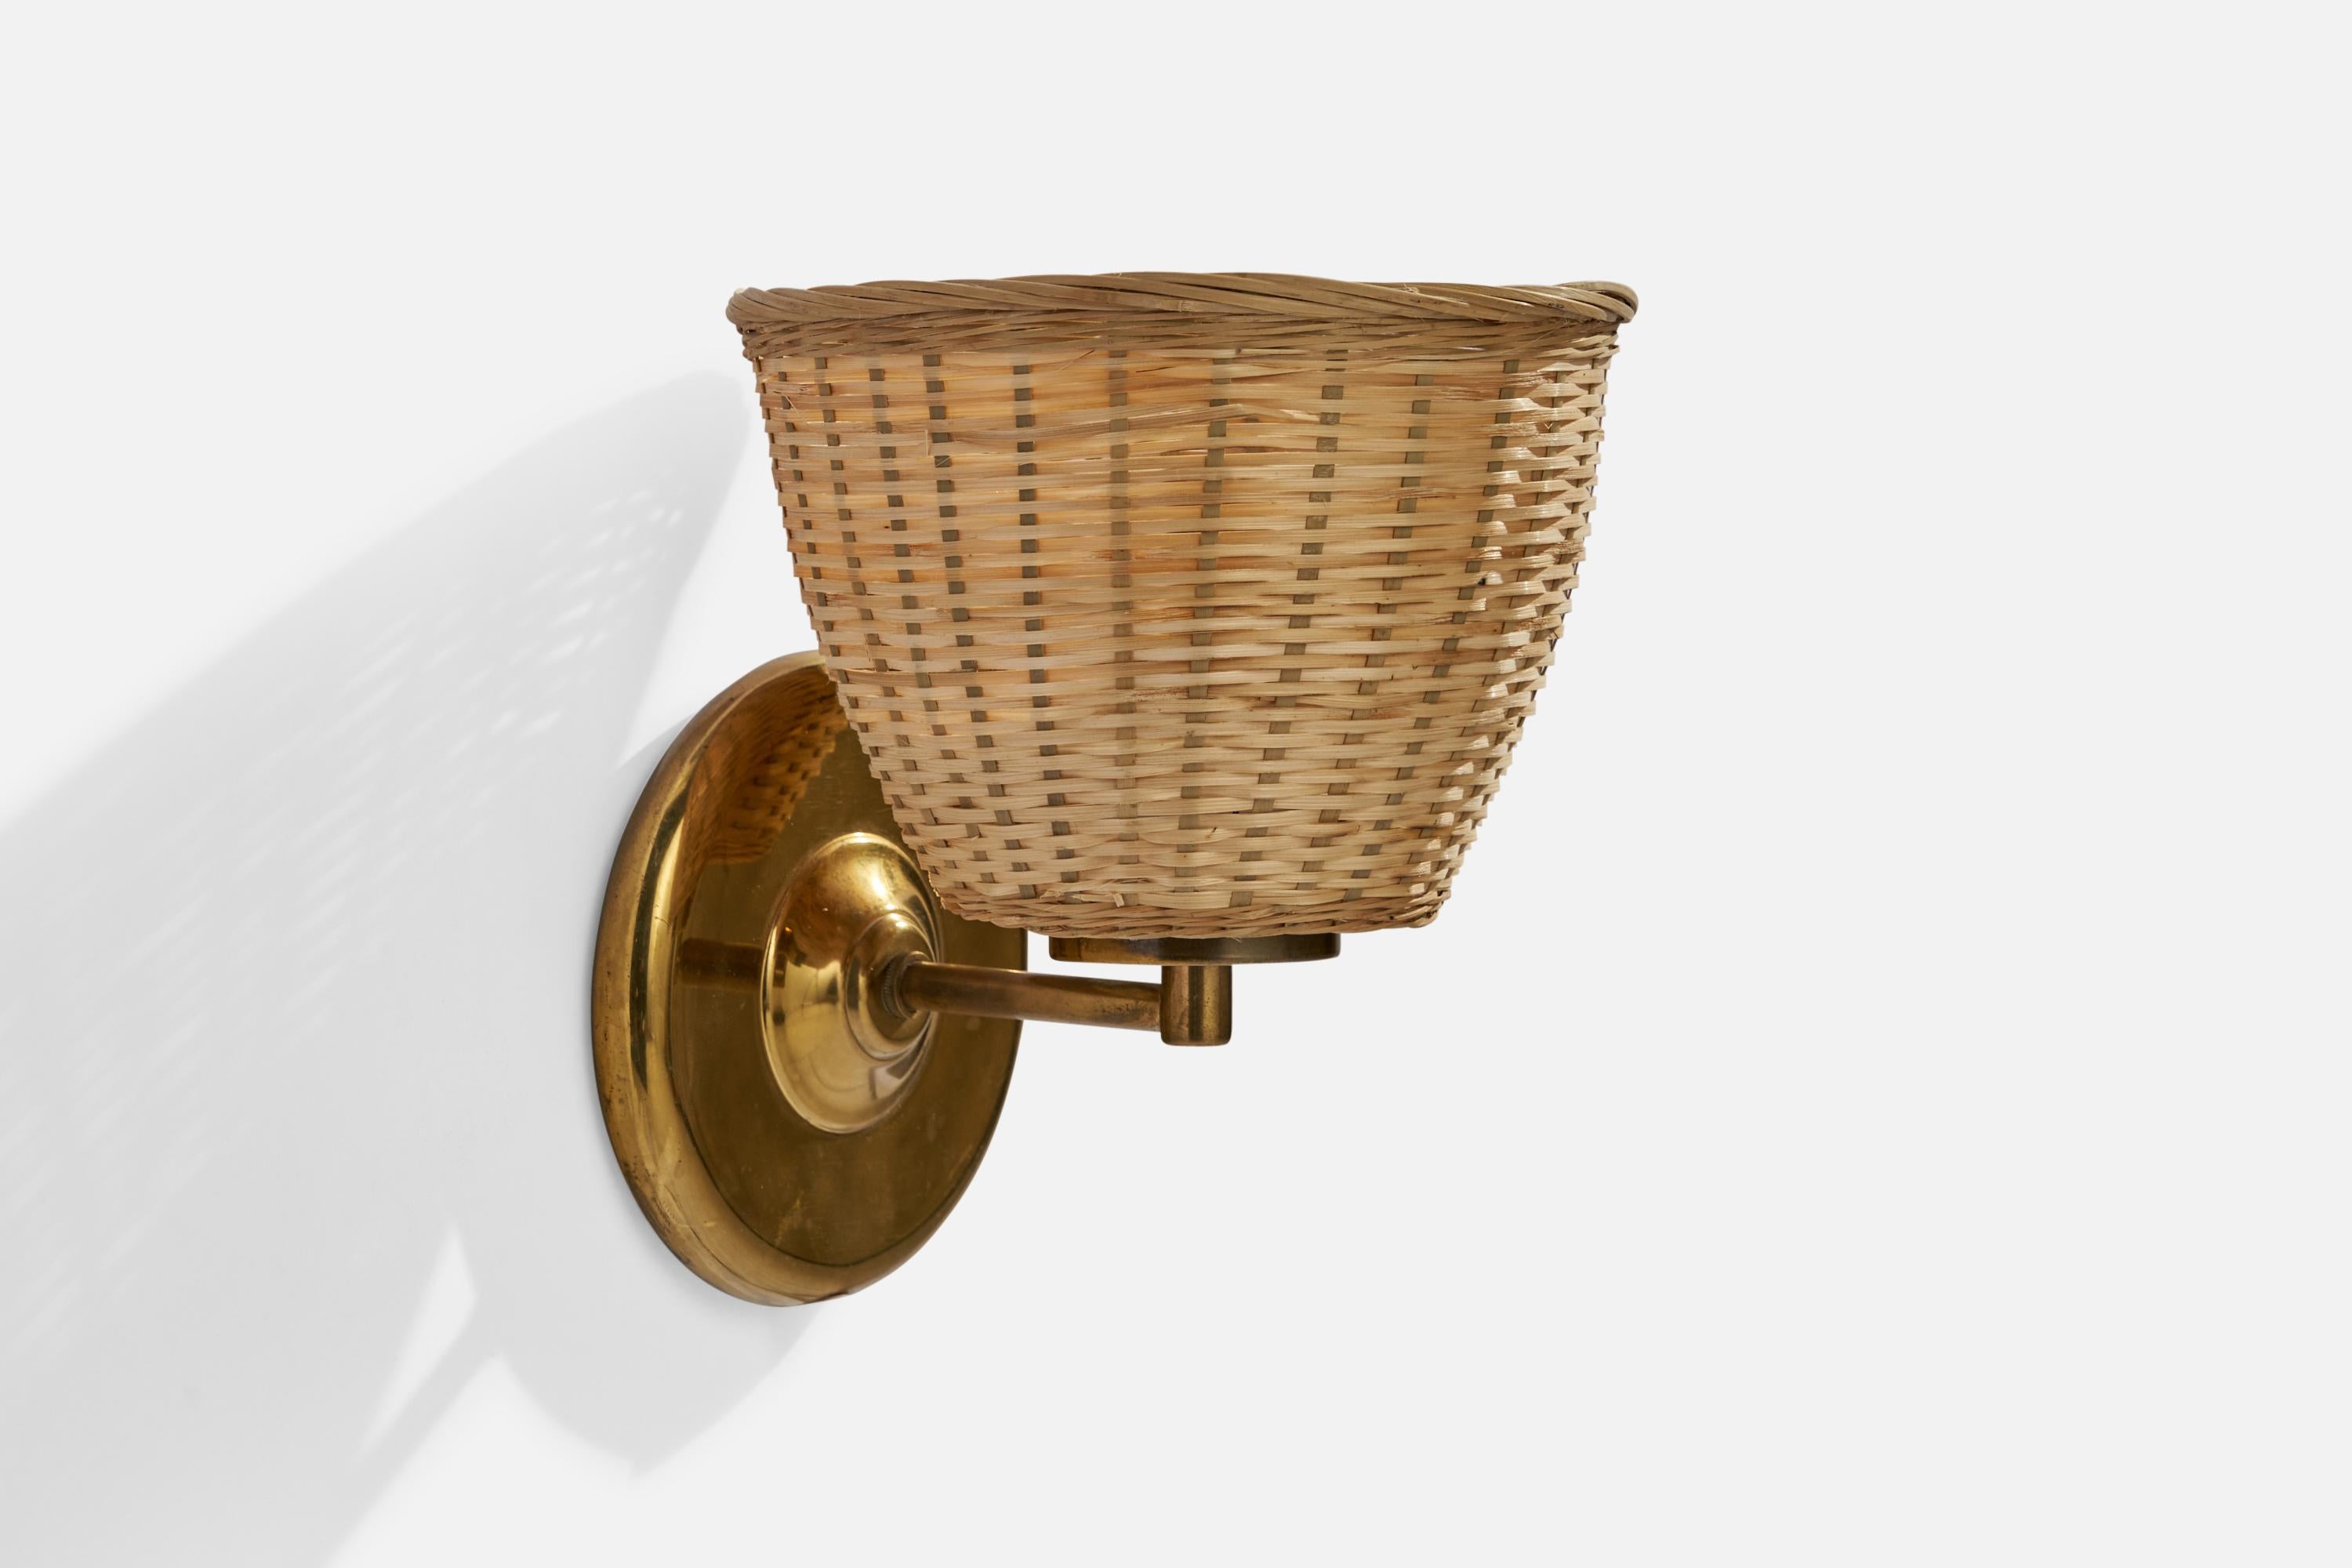 A brass and rattan wall light designed and produced by Ivars, Sweden, c. 1960s.

Overall Dimensions (inches): 8” H x 7”  W x 7” D
Back Plate Dimensions (inches): 5.25” H x 5.25” W x .75 D
Bulb Specifications: E-26 Bulb
Number of Sockets: 1
All